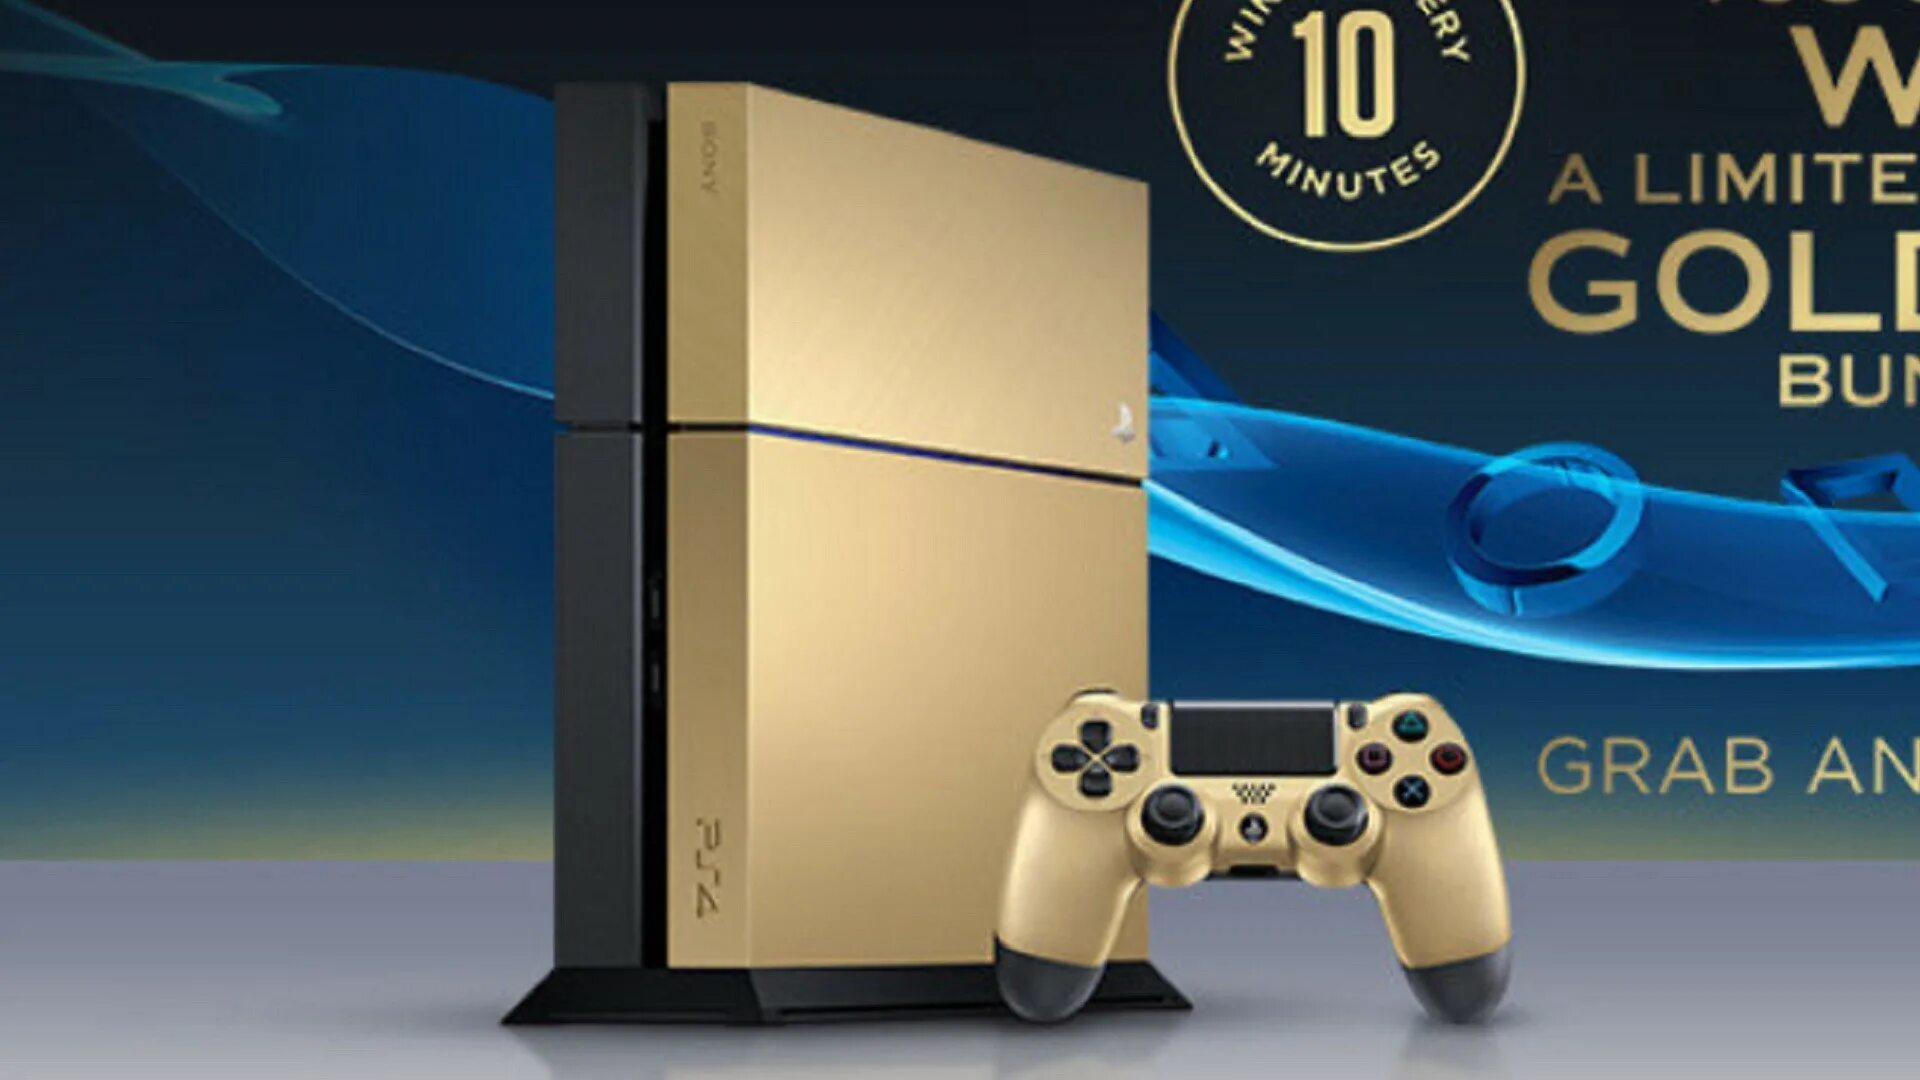 Sony Gold ps4 Limited Edition. ПС 4 фат Голд. Лимитированные ПС 4 фат. Ps4 fat Limited Edition.